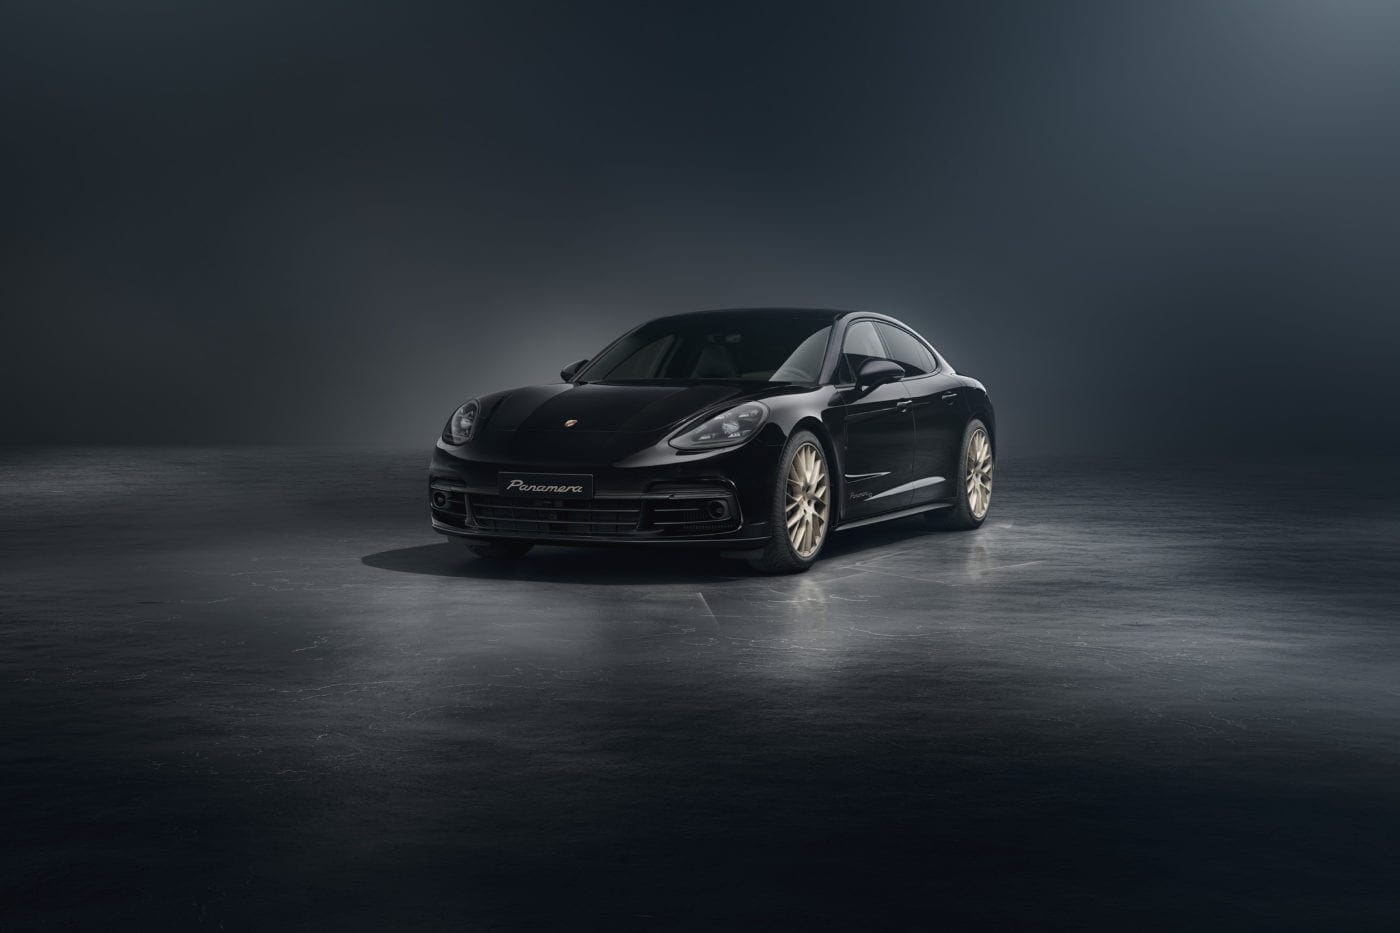 2020 Porsche Panamera 10 Year Edition: Glorious With White Gold